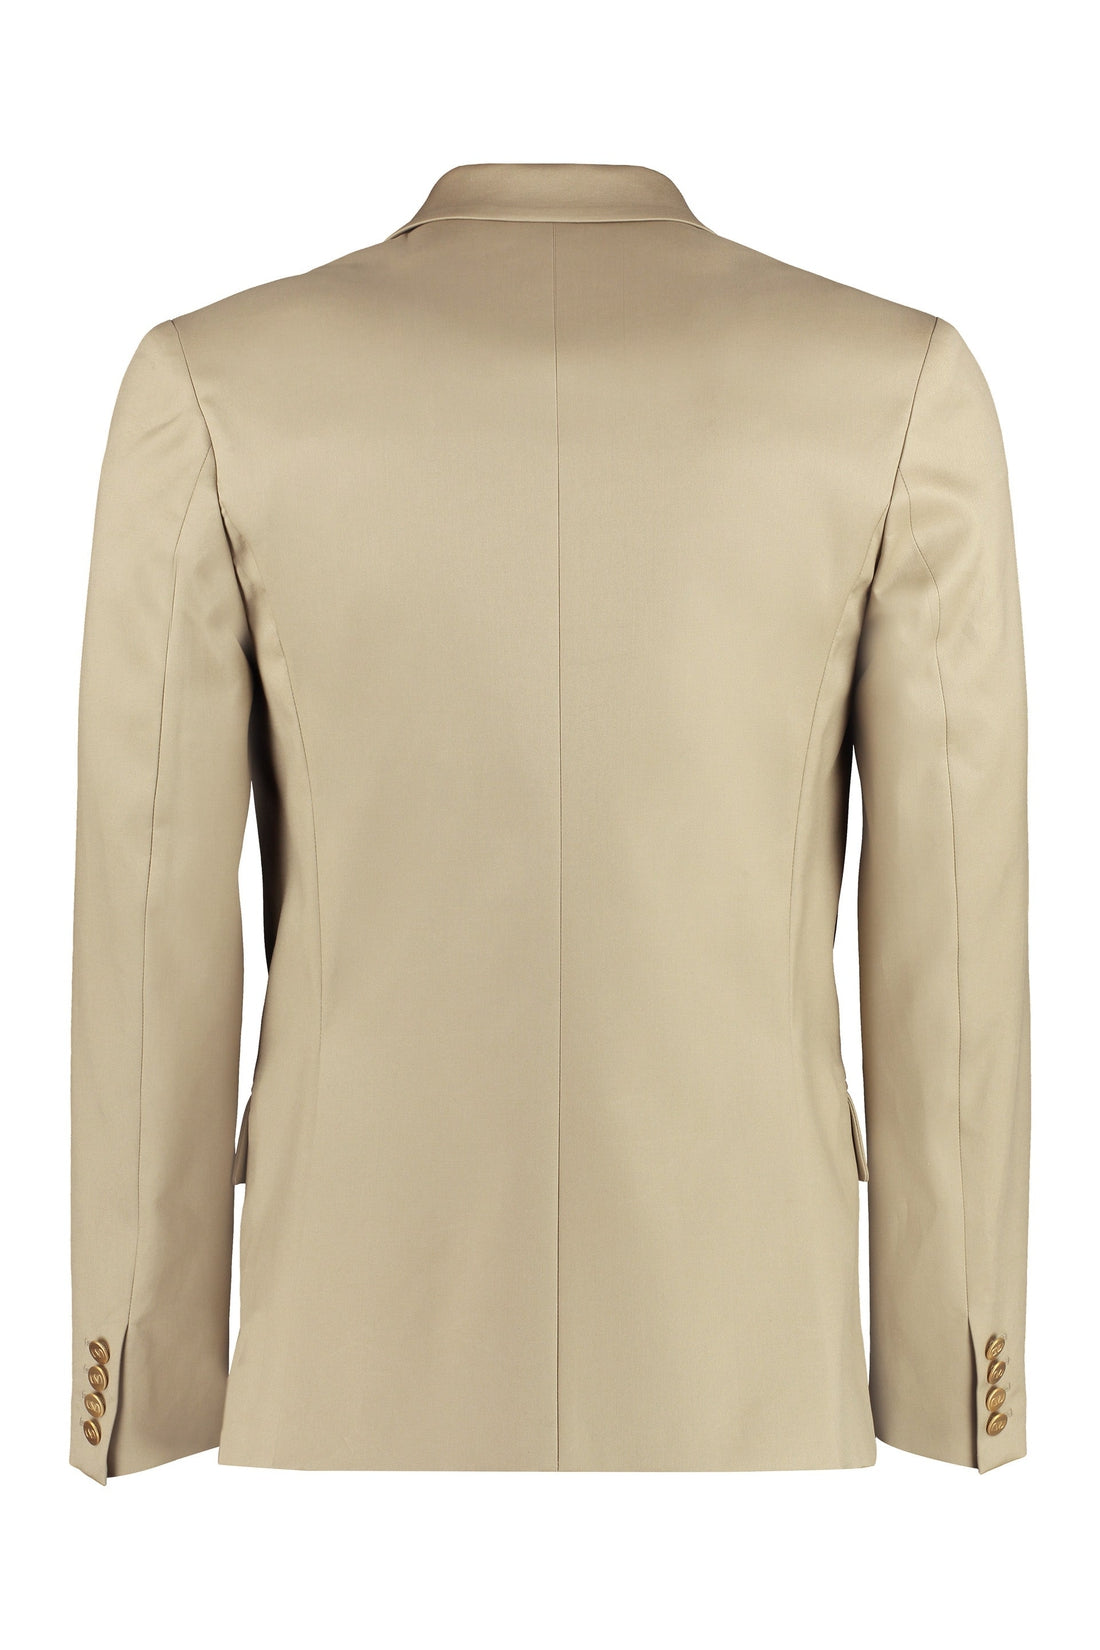 Valentino-OUTLET-SALE-Cotton double-breasted blazer-ARCHIVIST